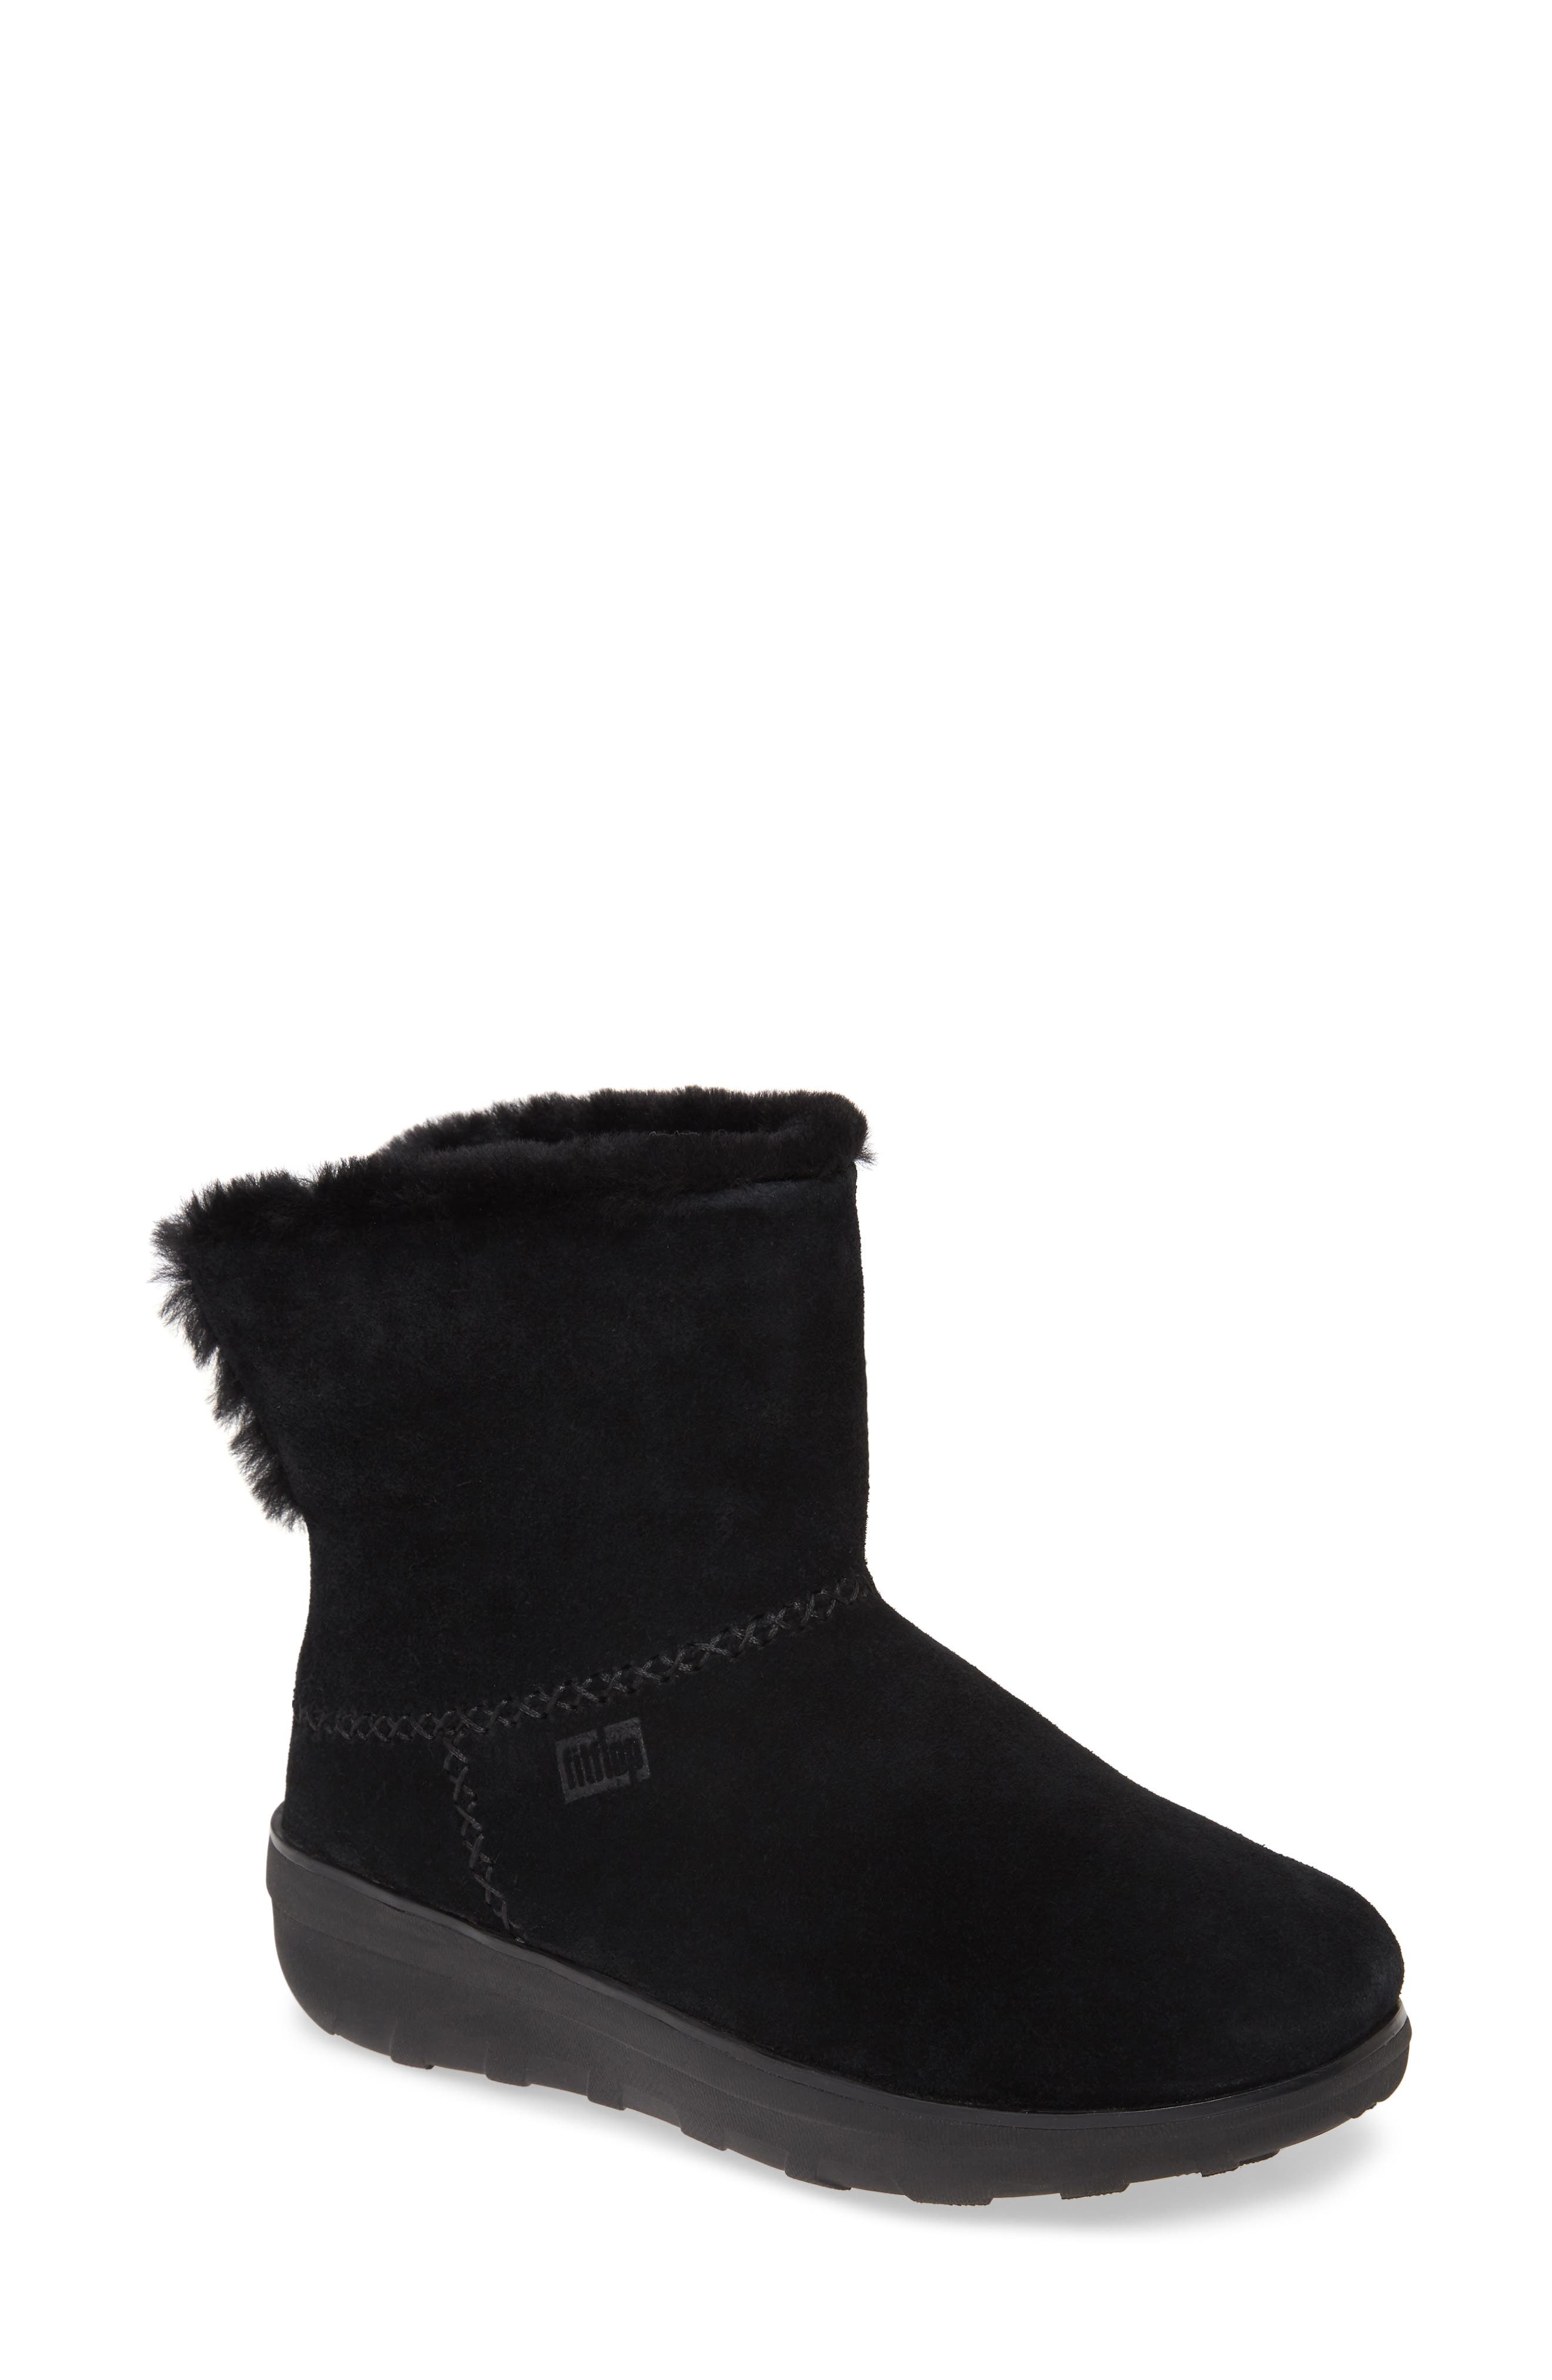 fitflop snow boots